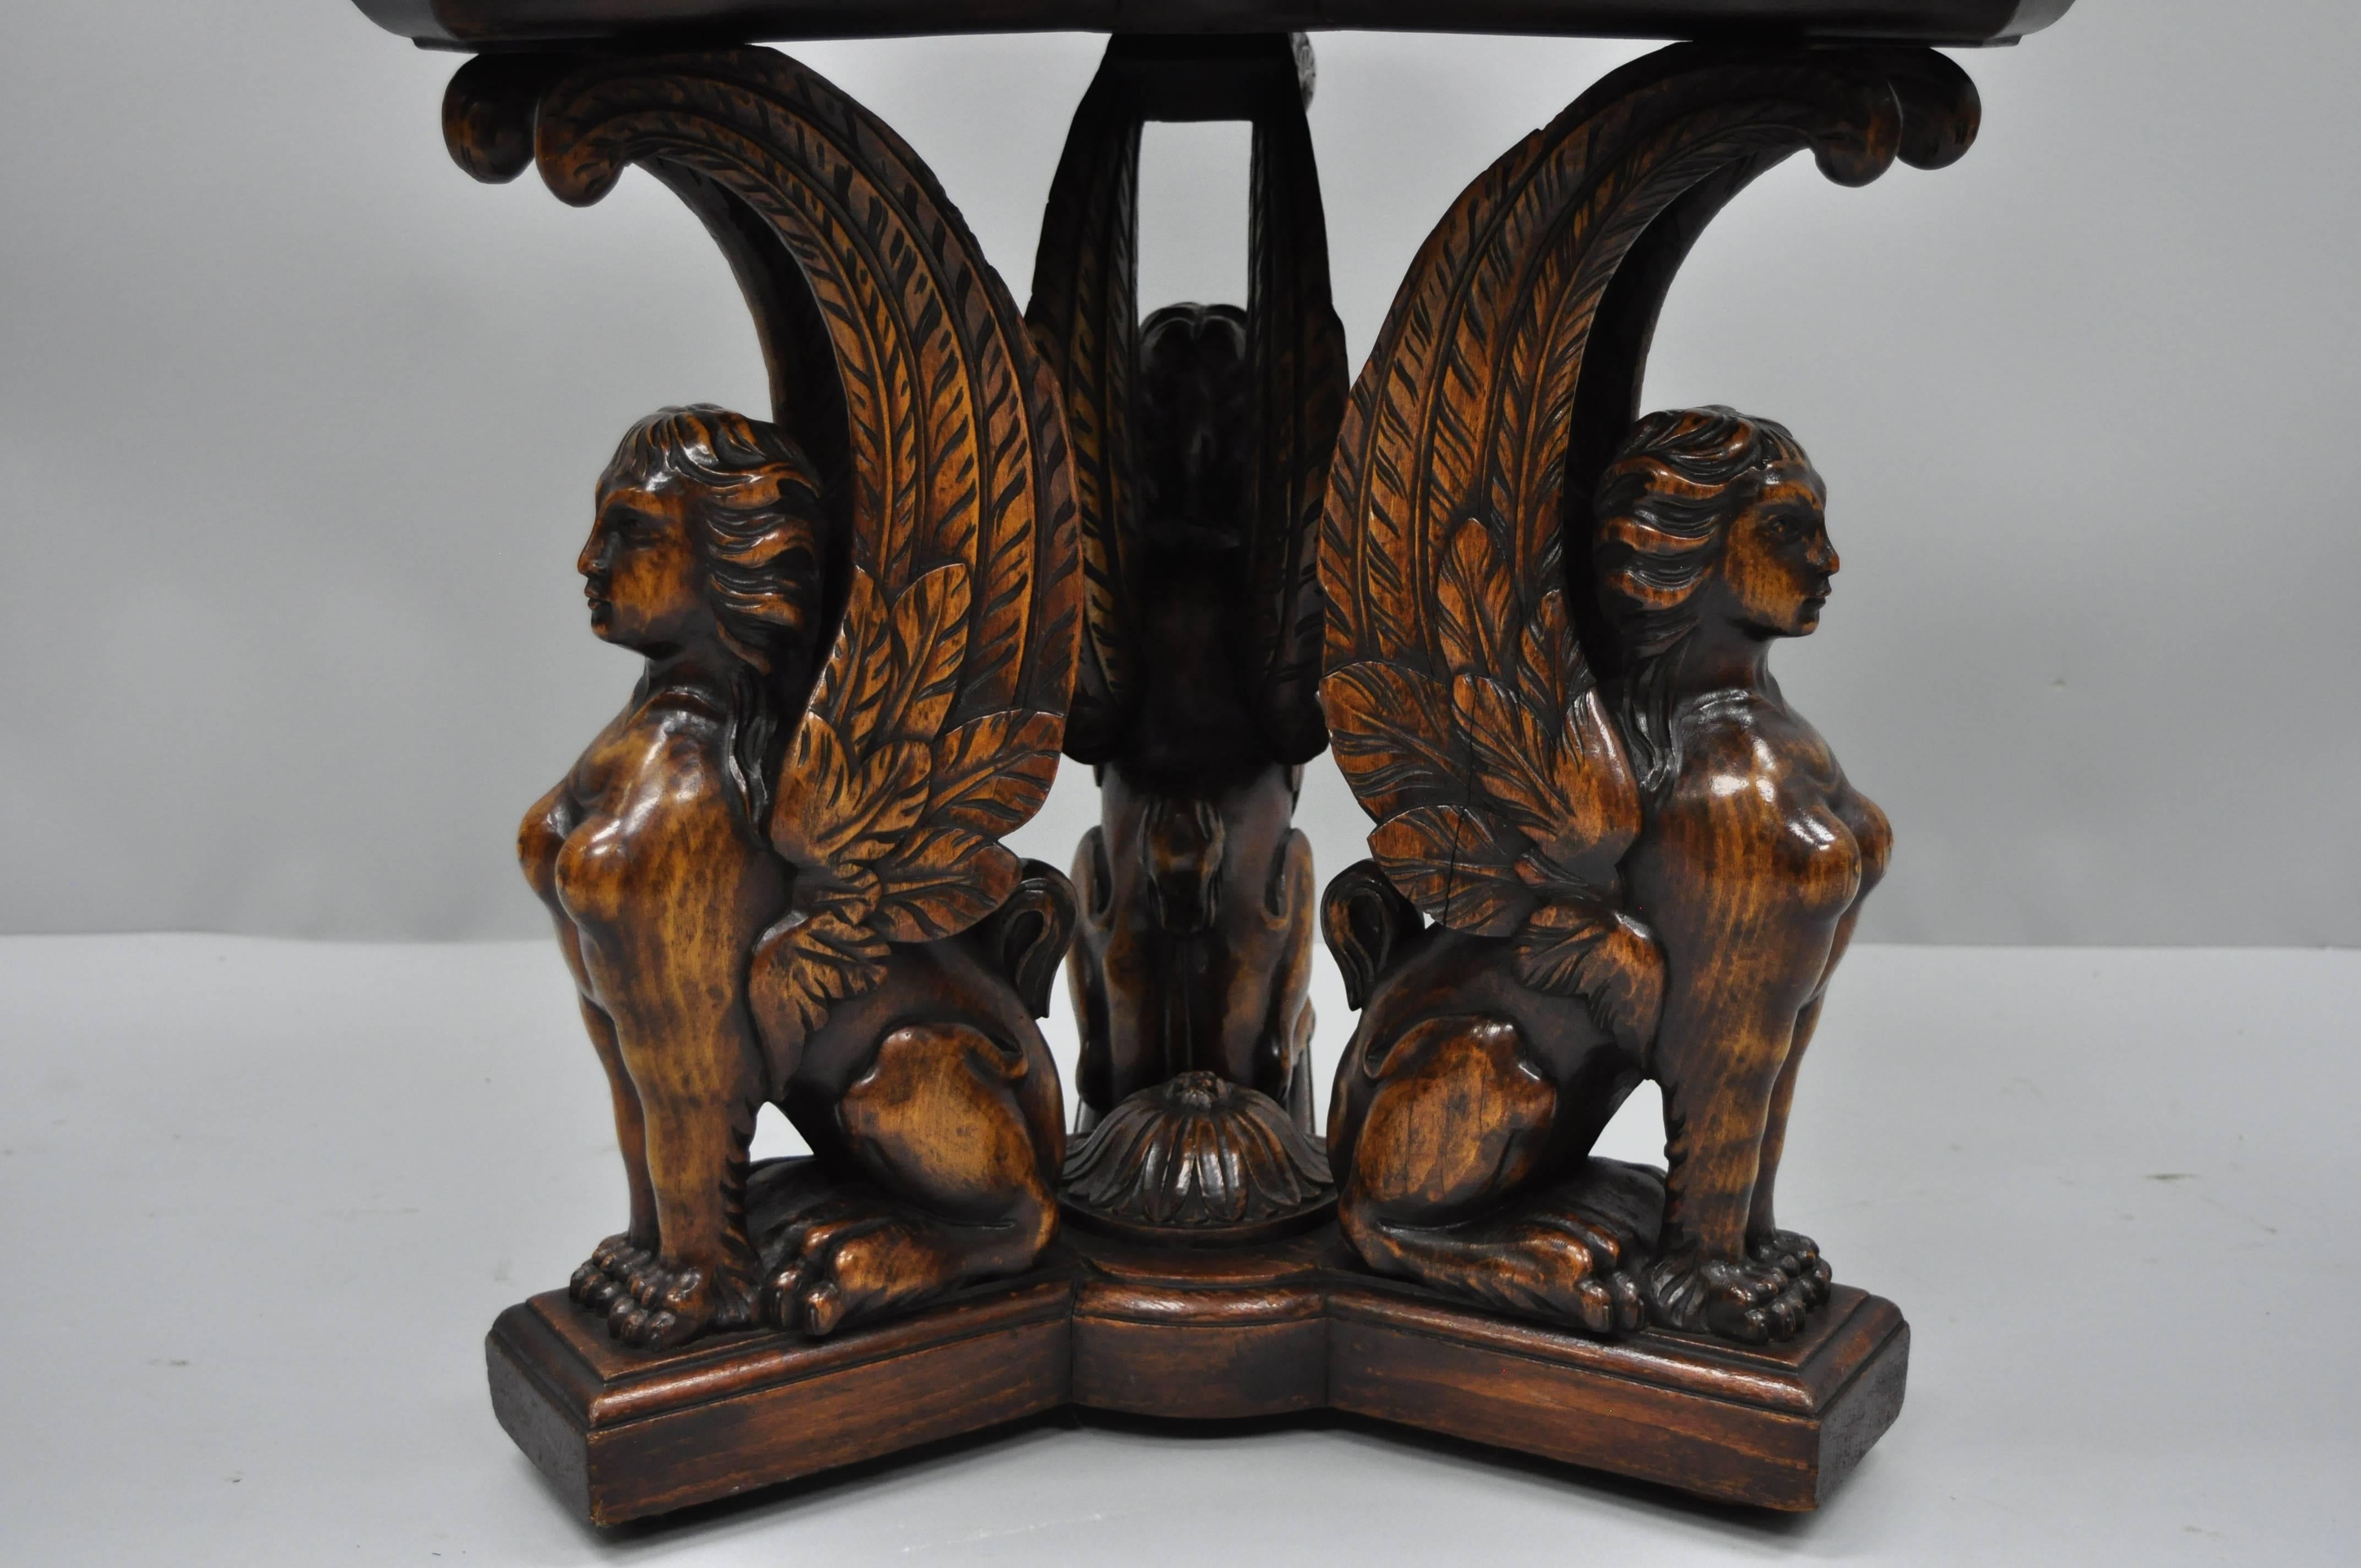 Figural carved walnut winged maiden griffin accent table. Item features solid carved walnut winged maiden griffin figures, triangular top with specimen and resin inlay, solid wood construction, very fine details, attractive style and form, early